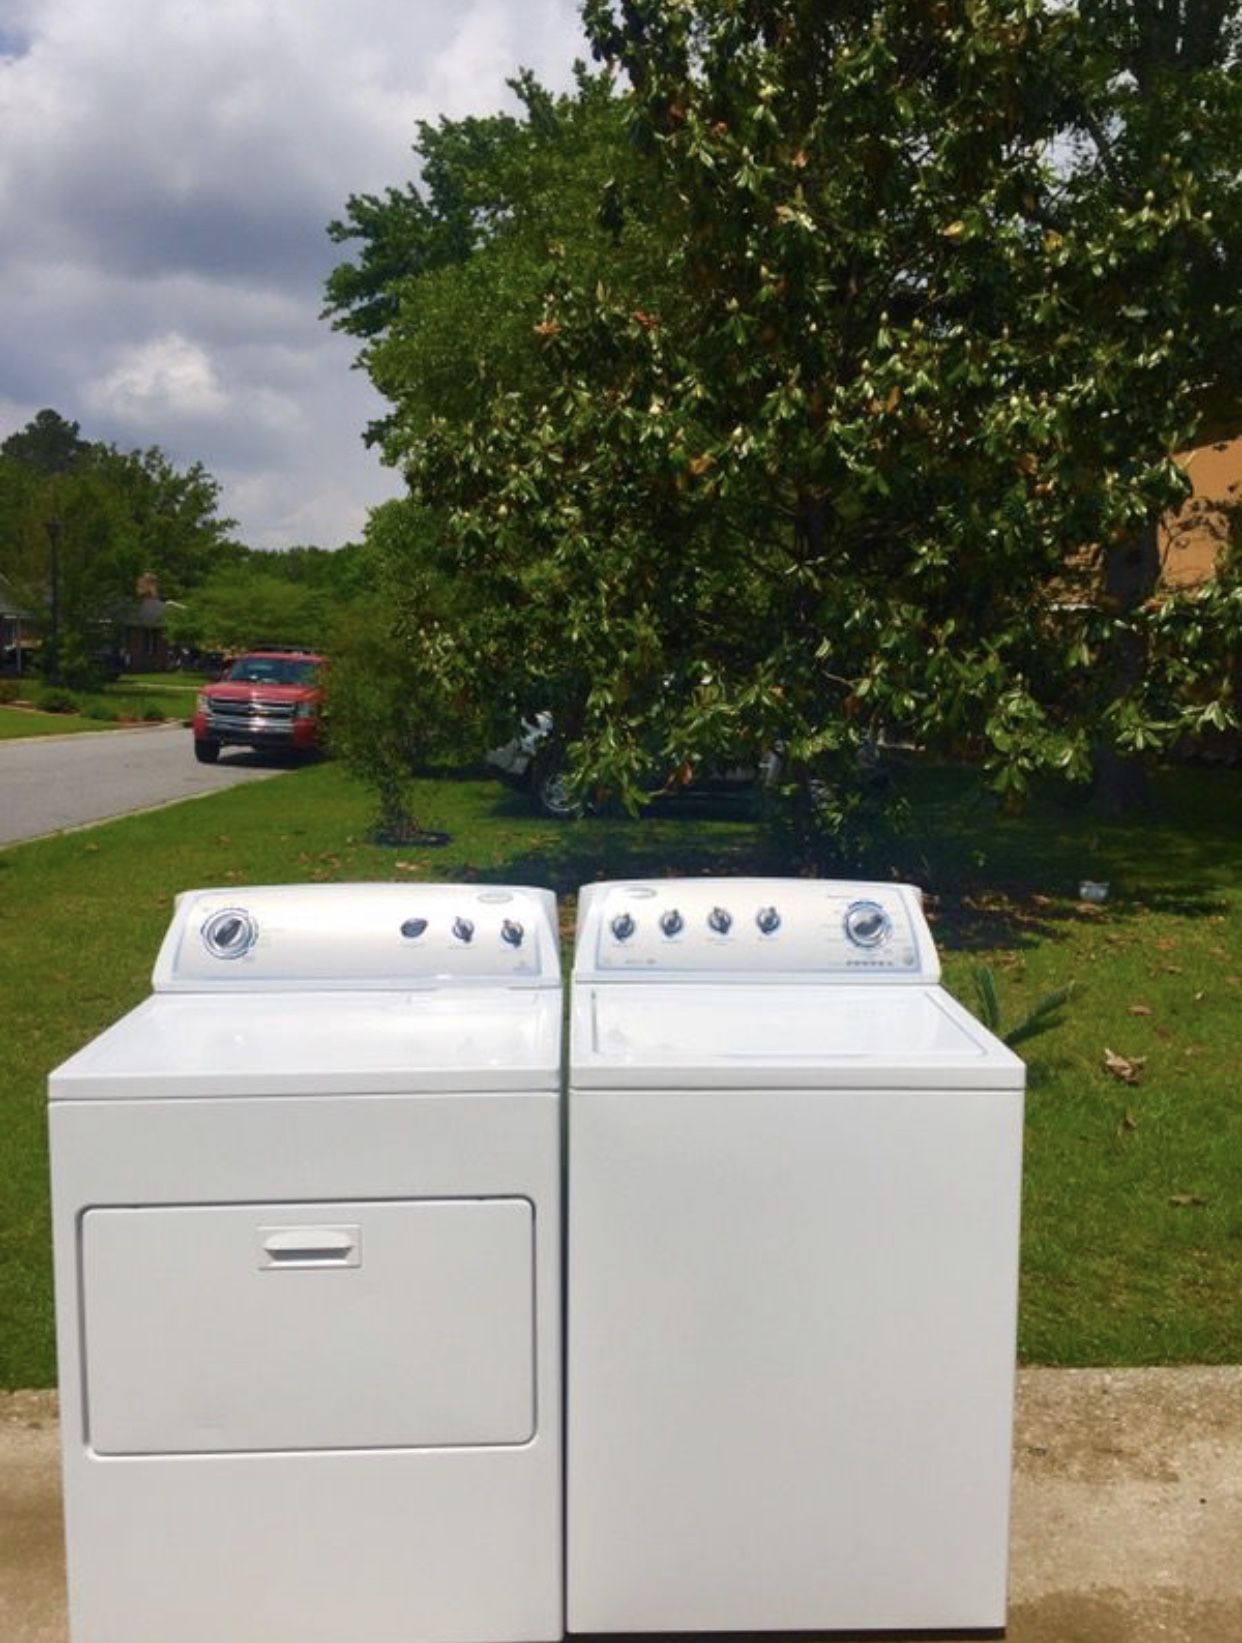 Barely Used Updated Eco🍃Boost Super Capacity Matching Whirlpool Washer and Dryer Set Available